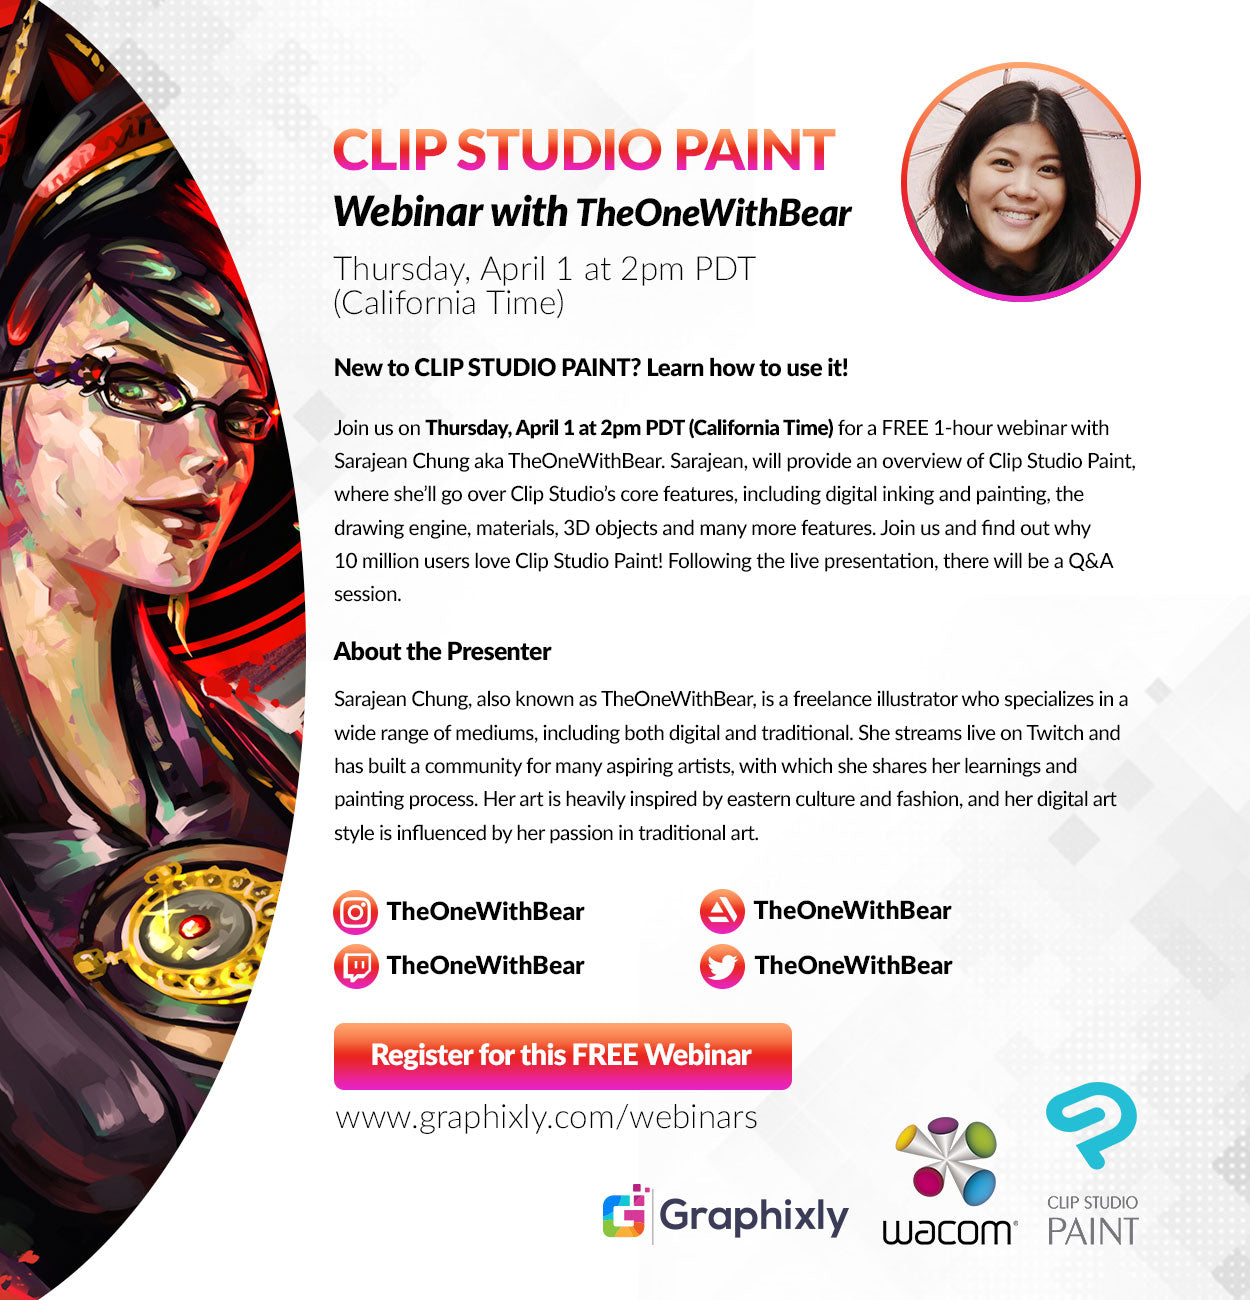 Webinar - New to CLIP STUDIO PAINT? Learn how to use it! with TheOneWithBear